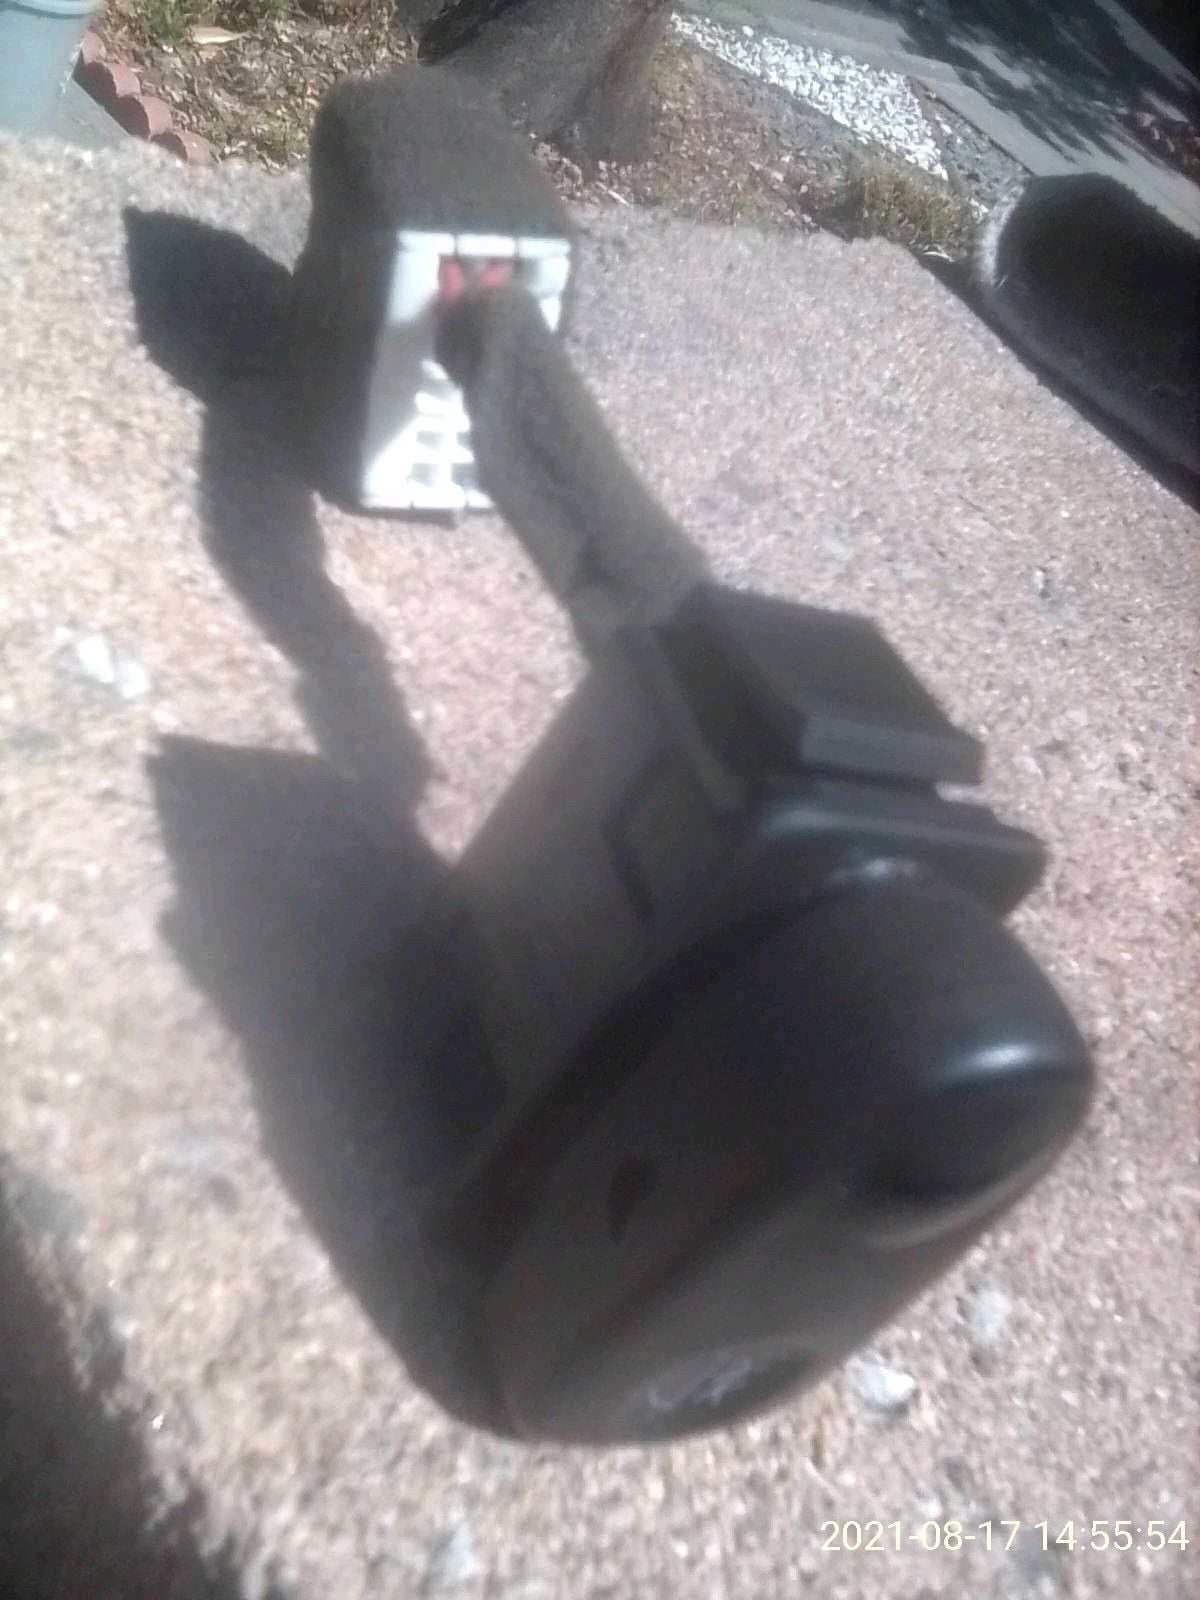 Miscellaneous - FD - OEM Fog Light Switch - Used - 1993 to 2002 Mazda RX-7 - San Jose, CA 95121, United States